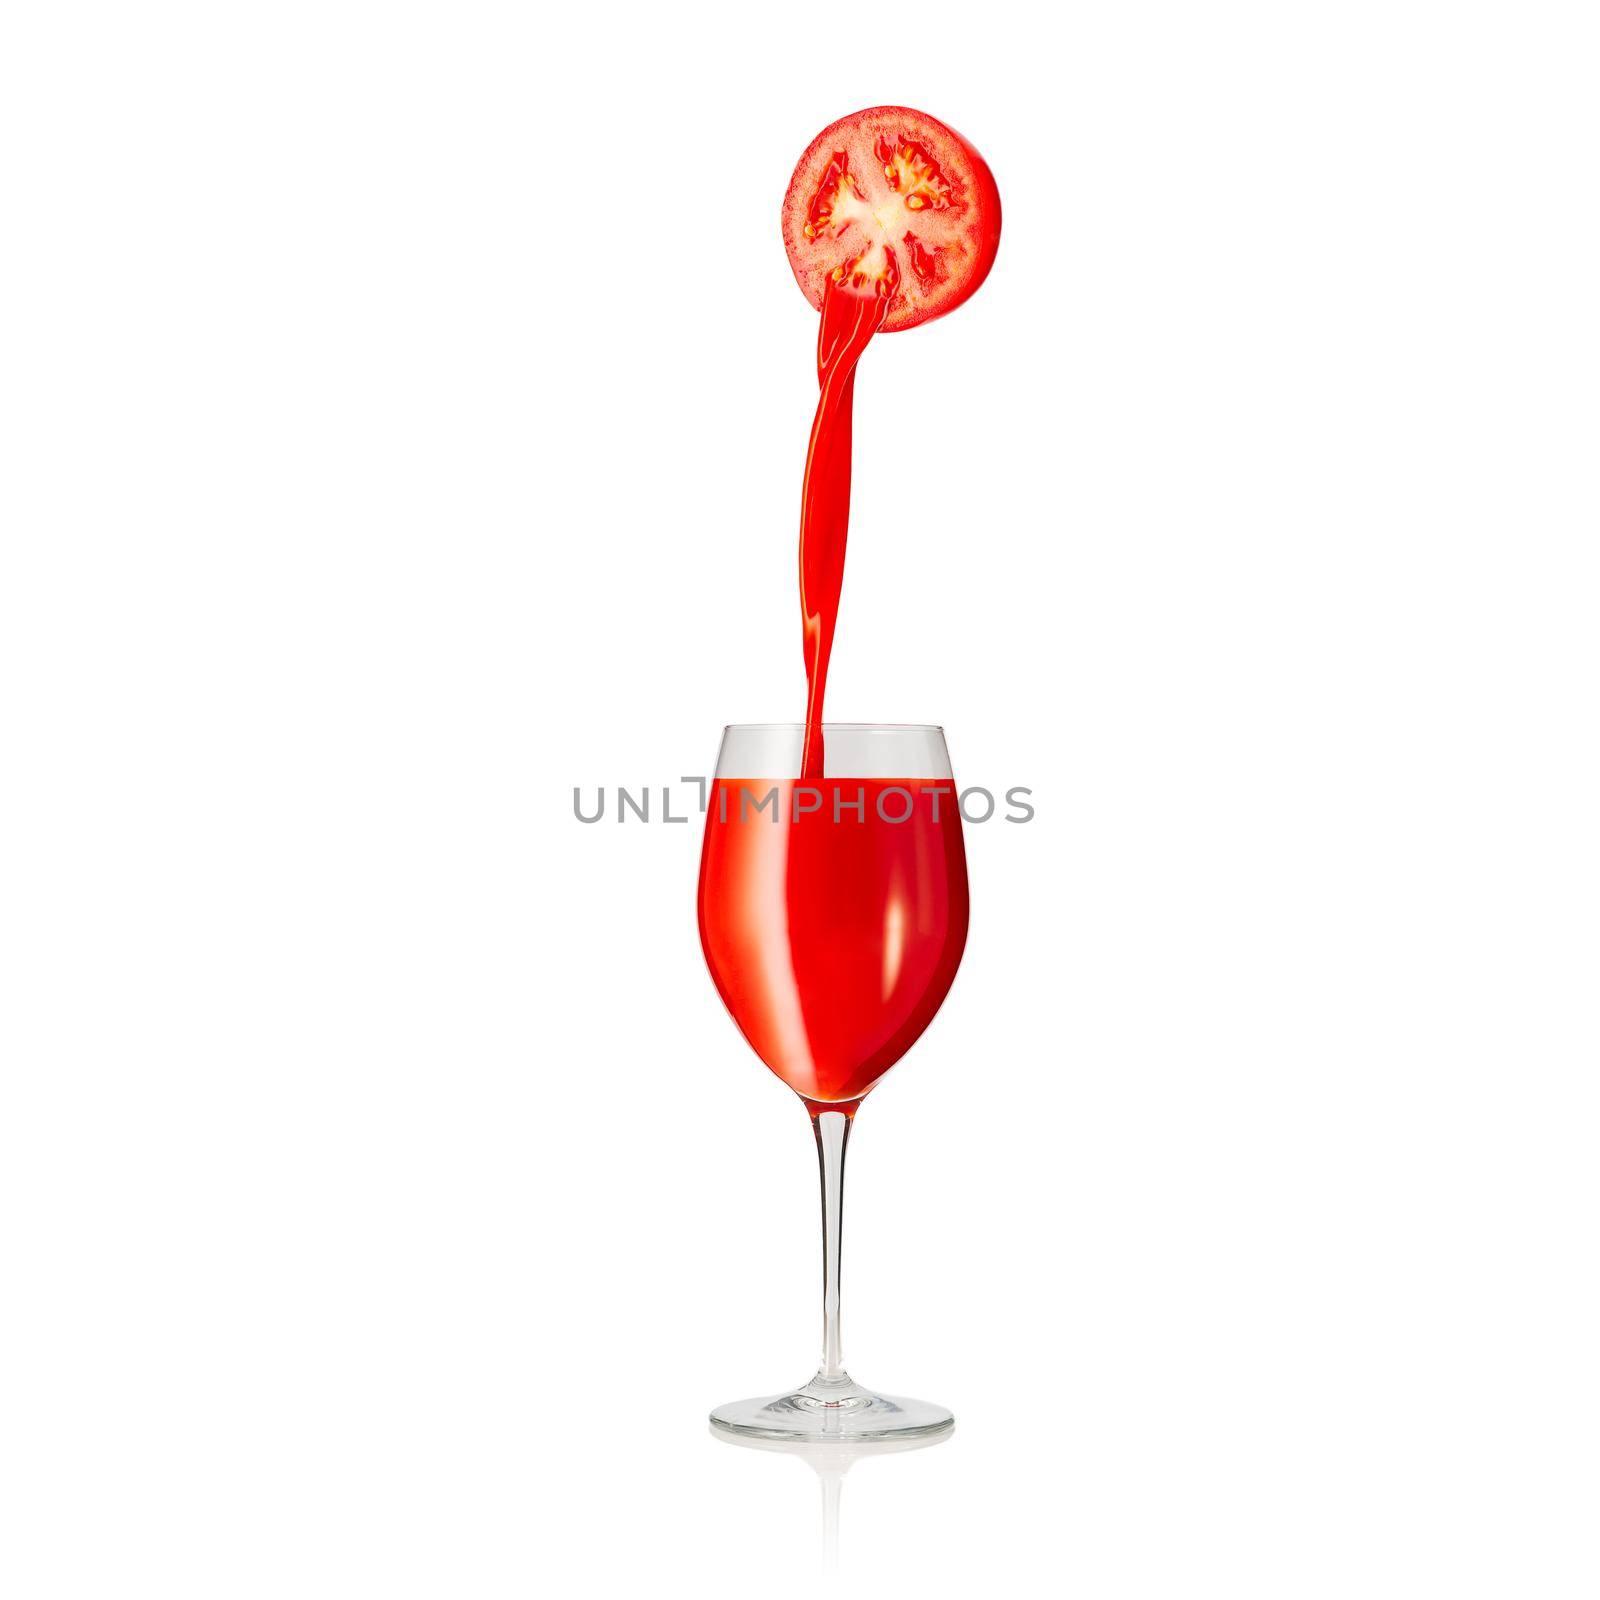 pouring tomato juice to glass isolated on white background. pouring tomato juice from fresh tomato.